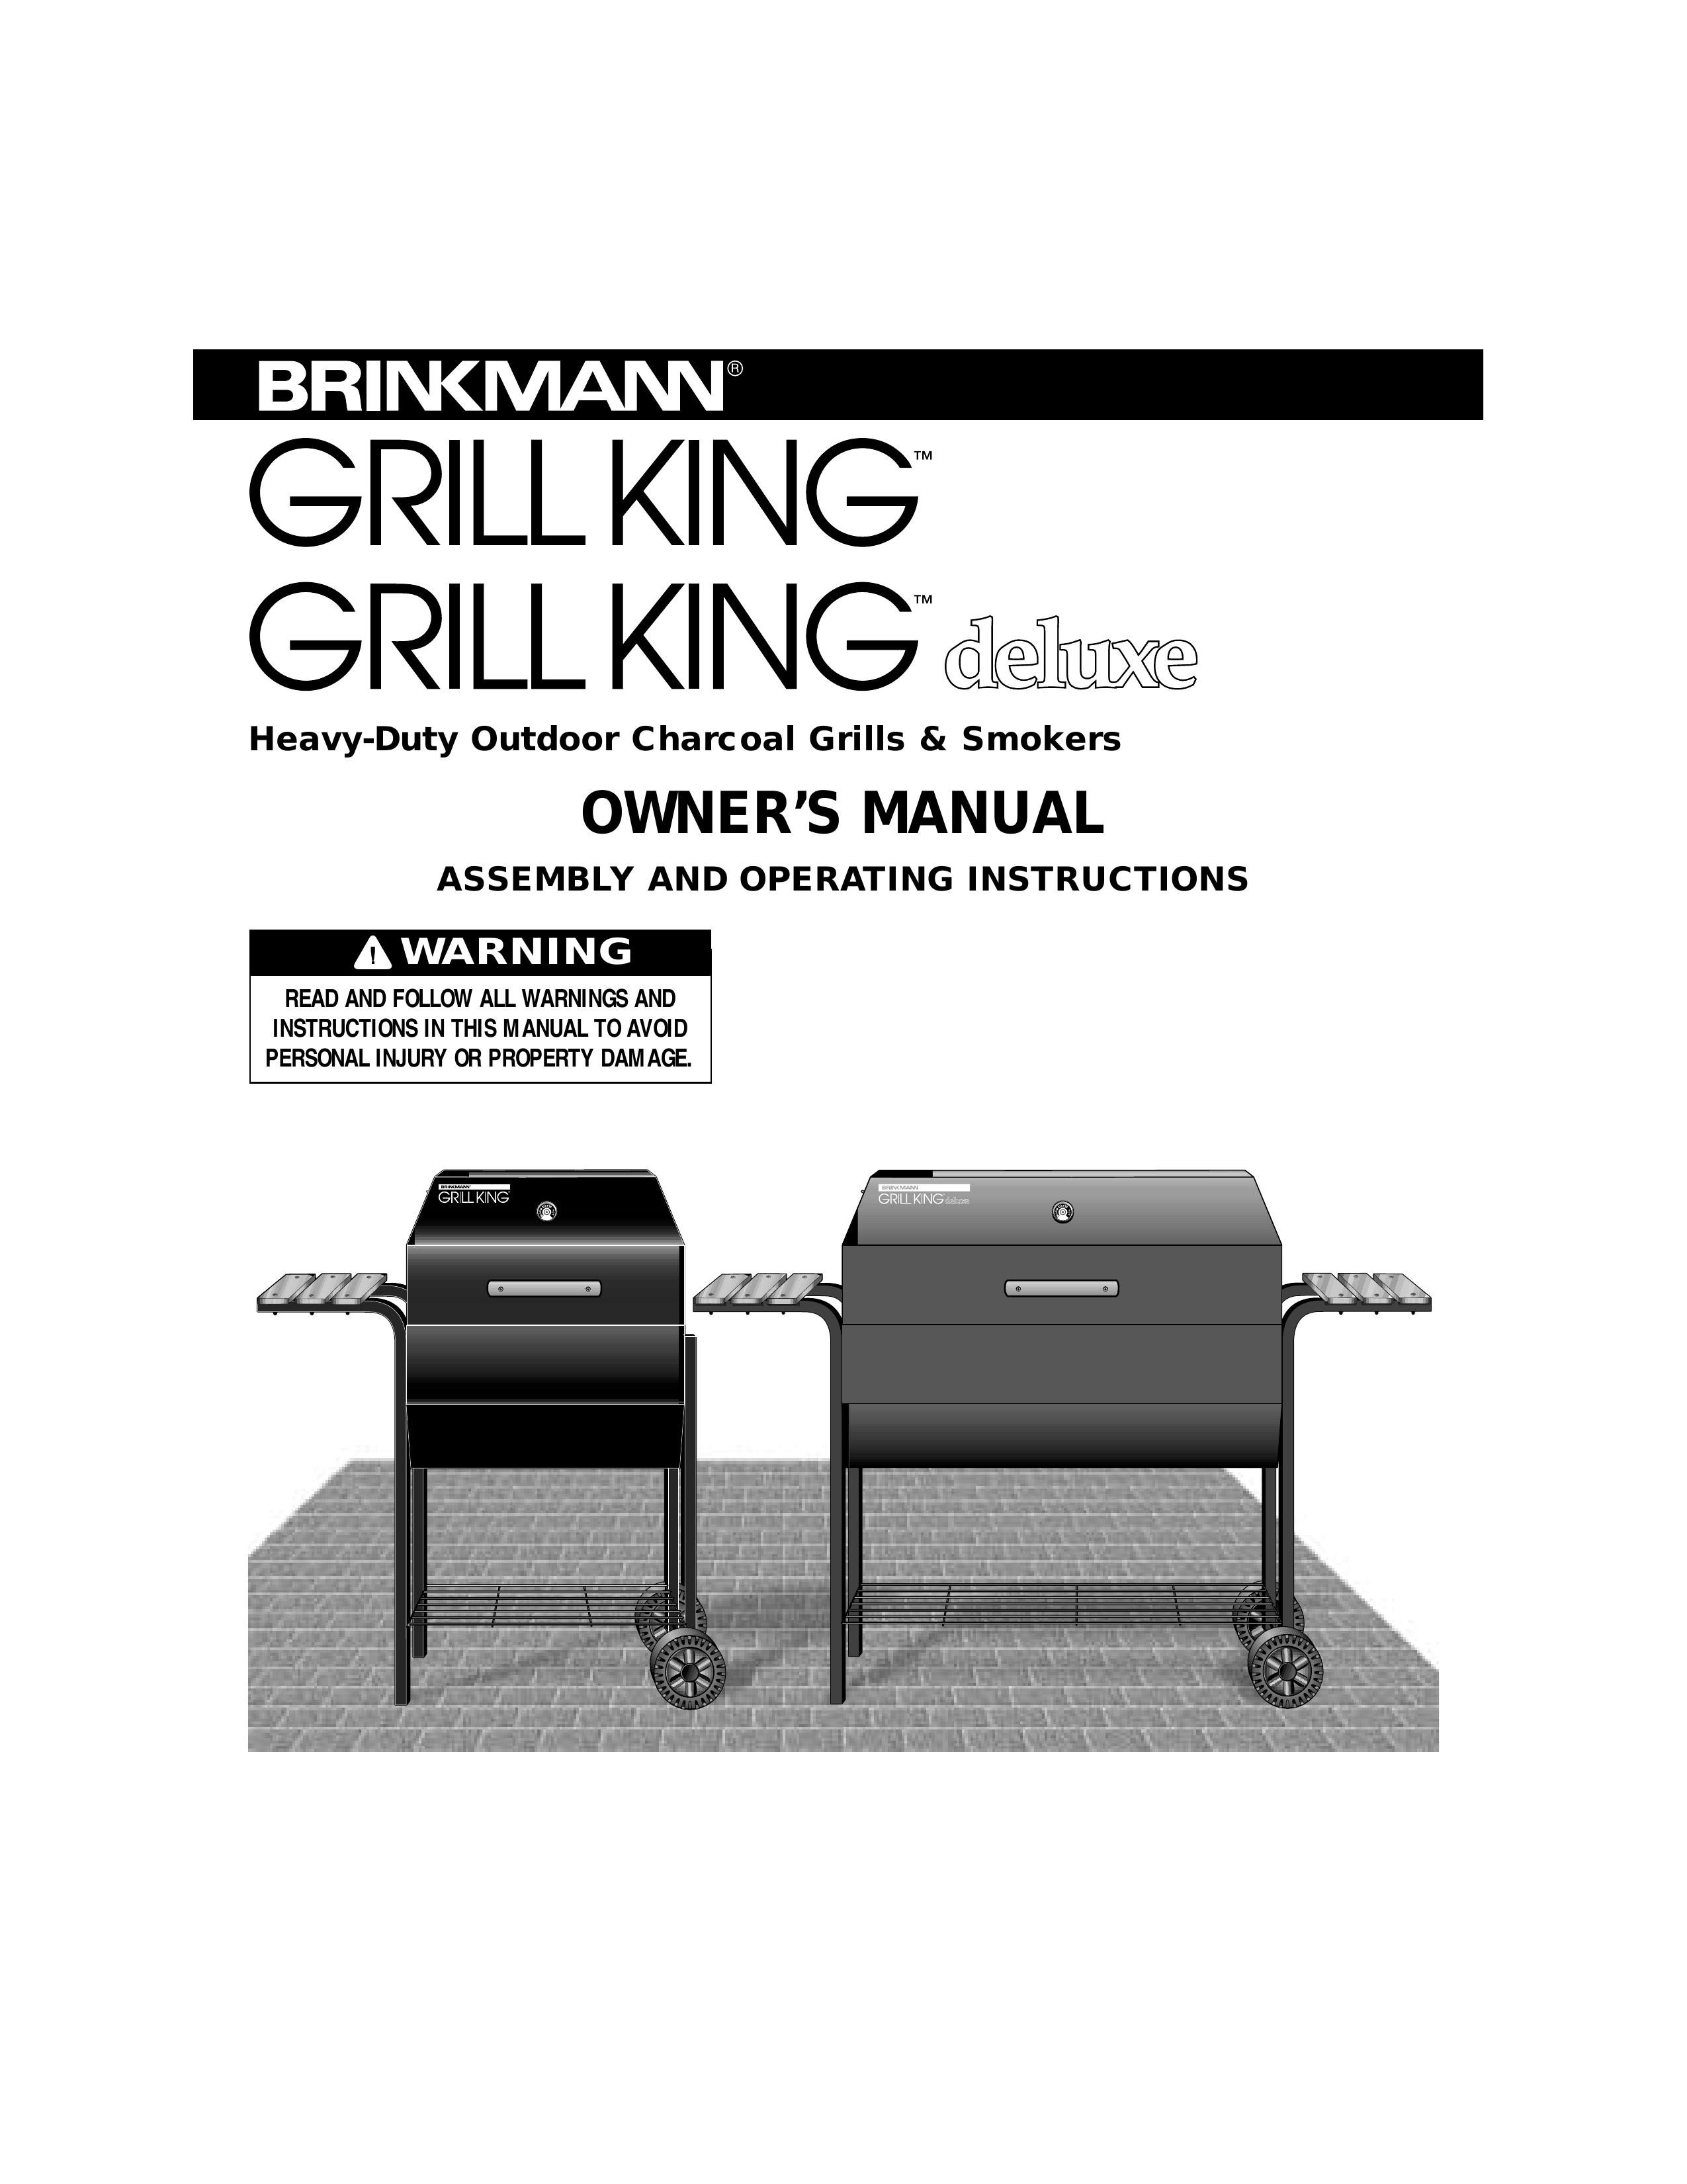 Vent-a-Hood 812-3440-0 (Mesquite) Charcoal Grill User Manual